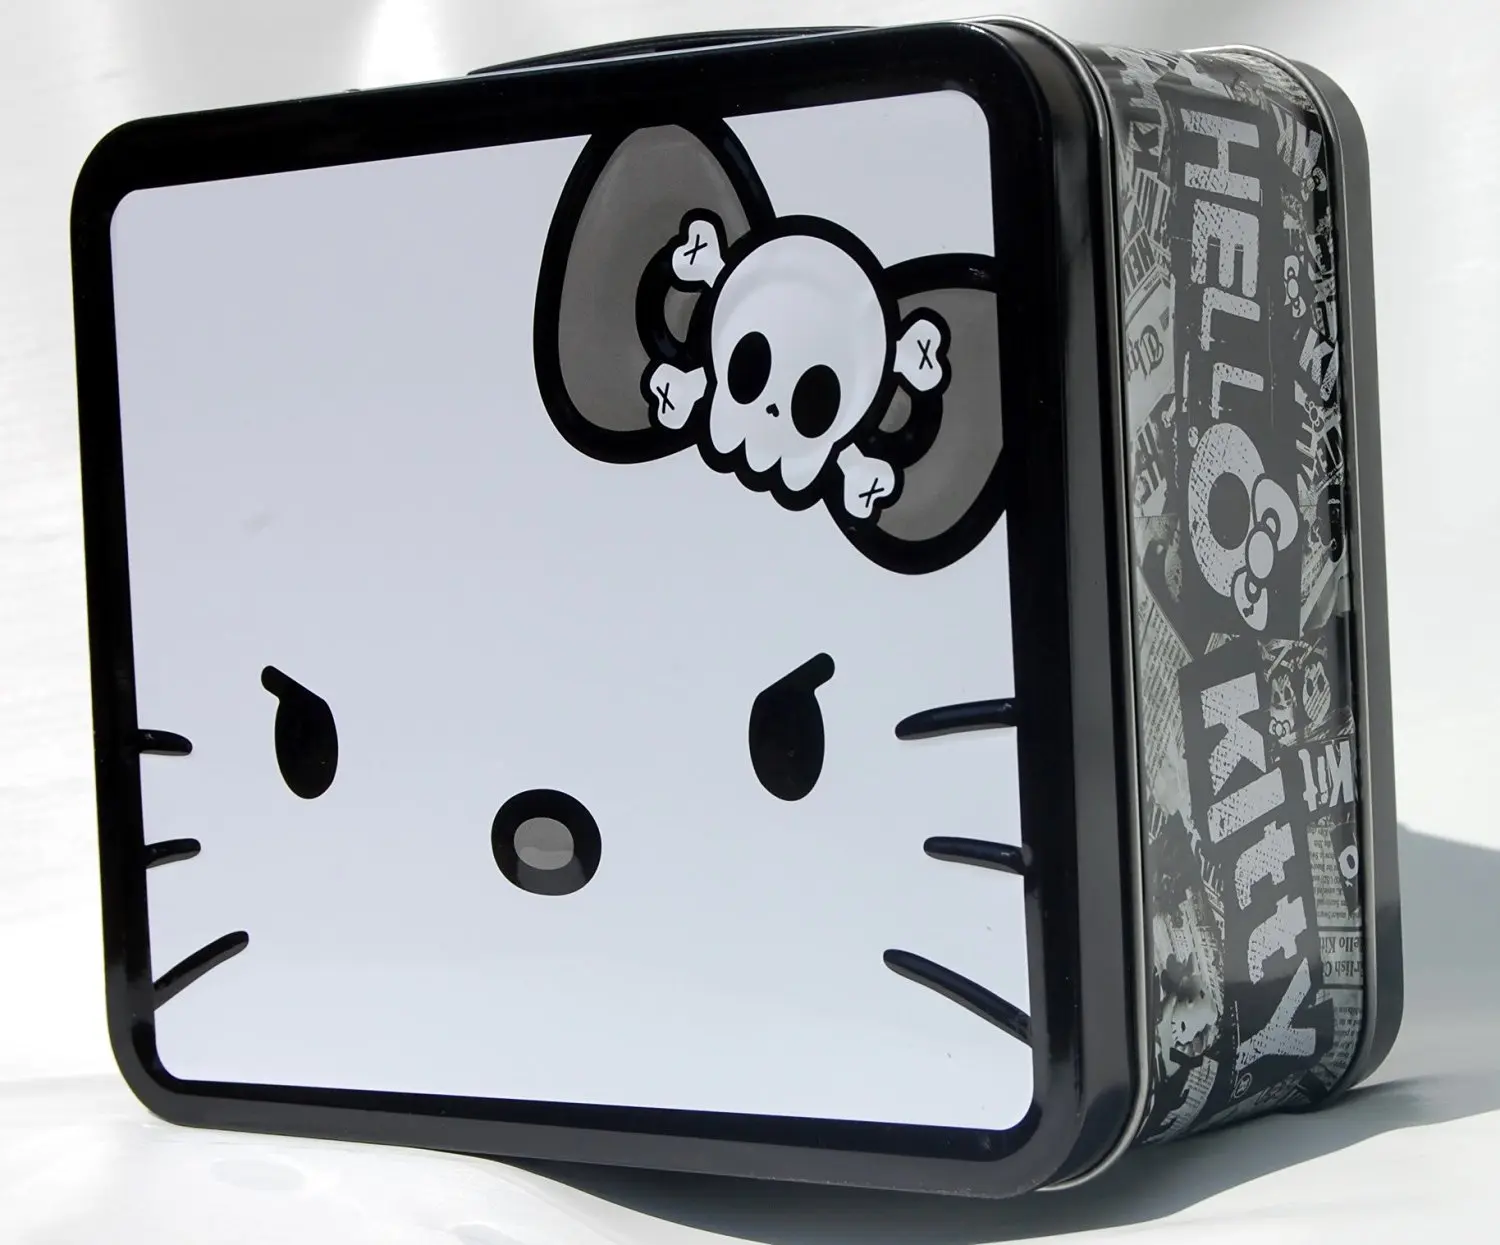 Buy Hello Kitty Black White Metal Lunch Box Sanlb0009 In Cheap Price On Alibaba Com